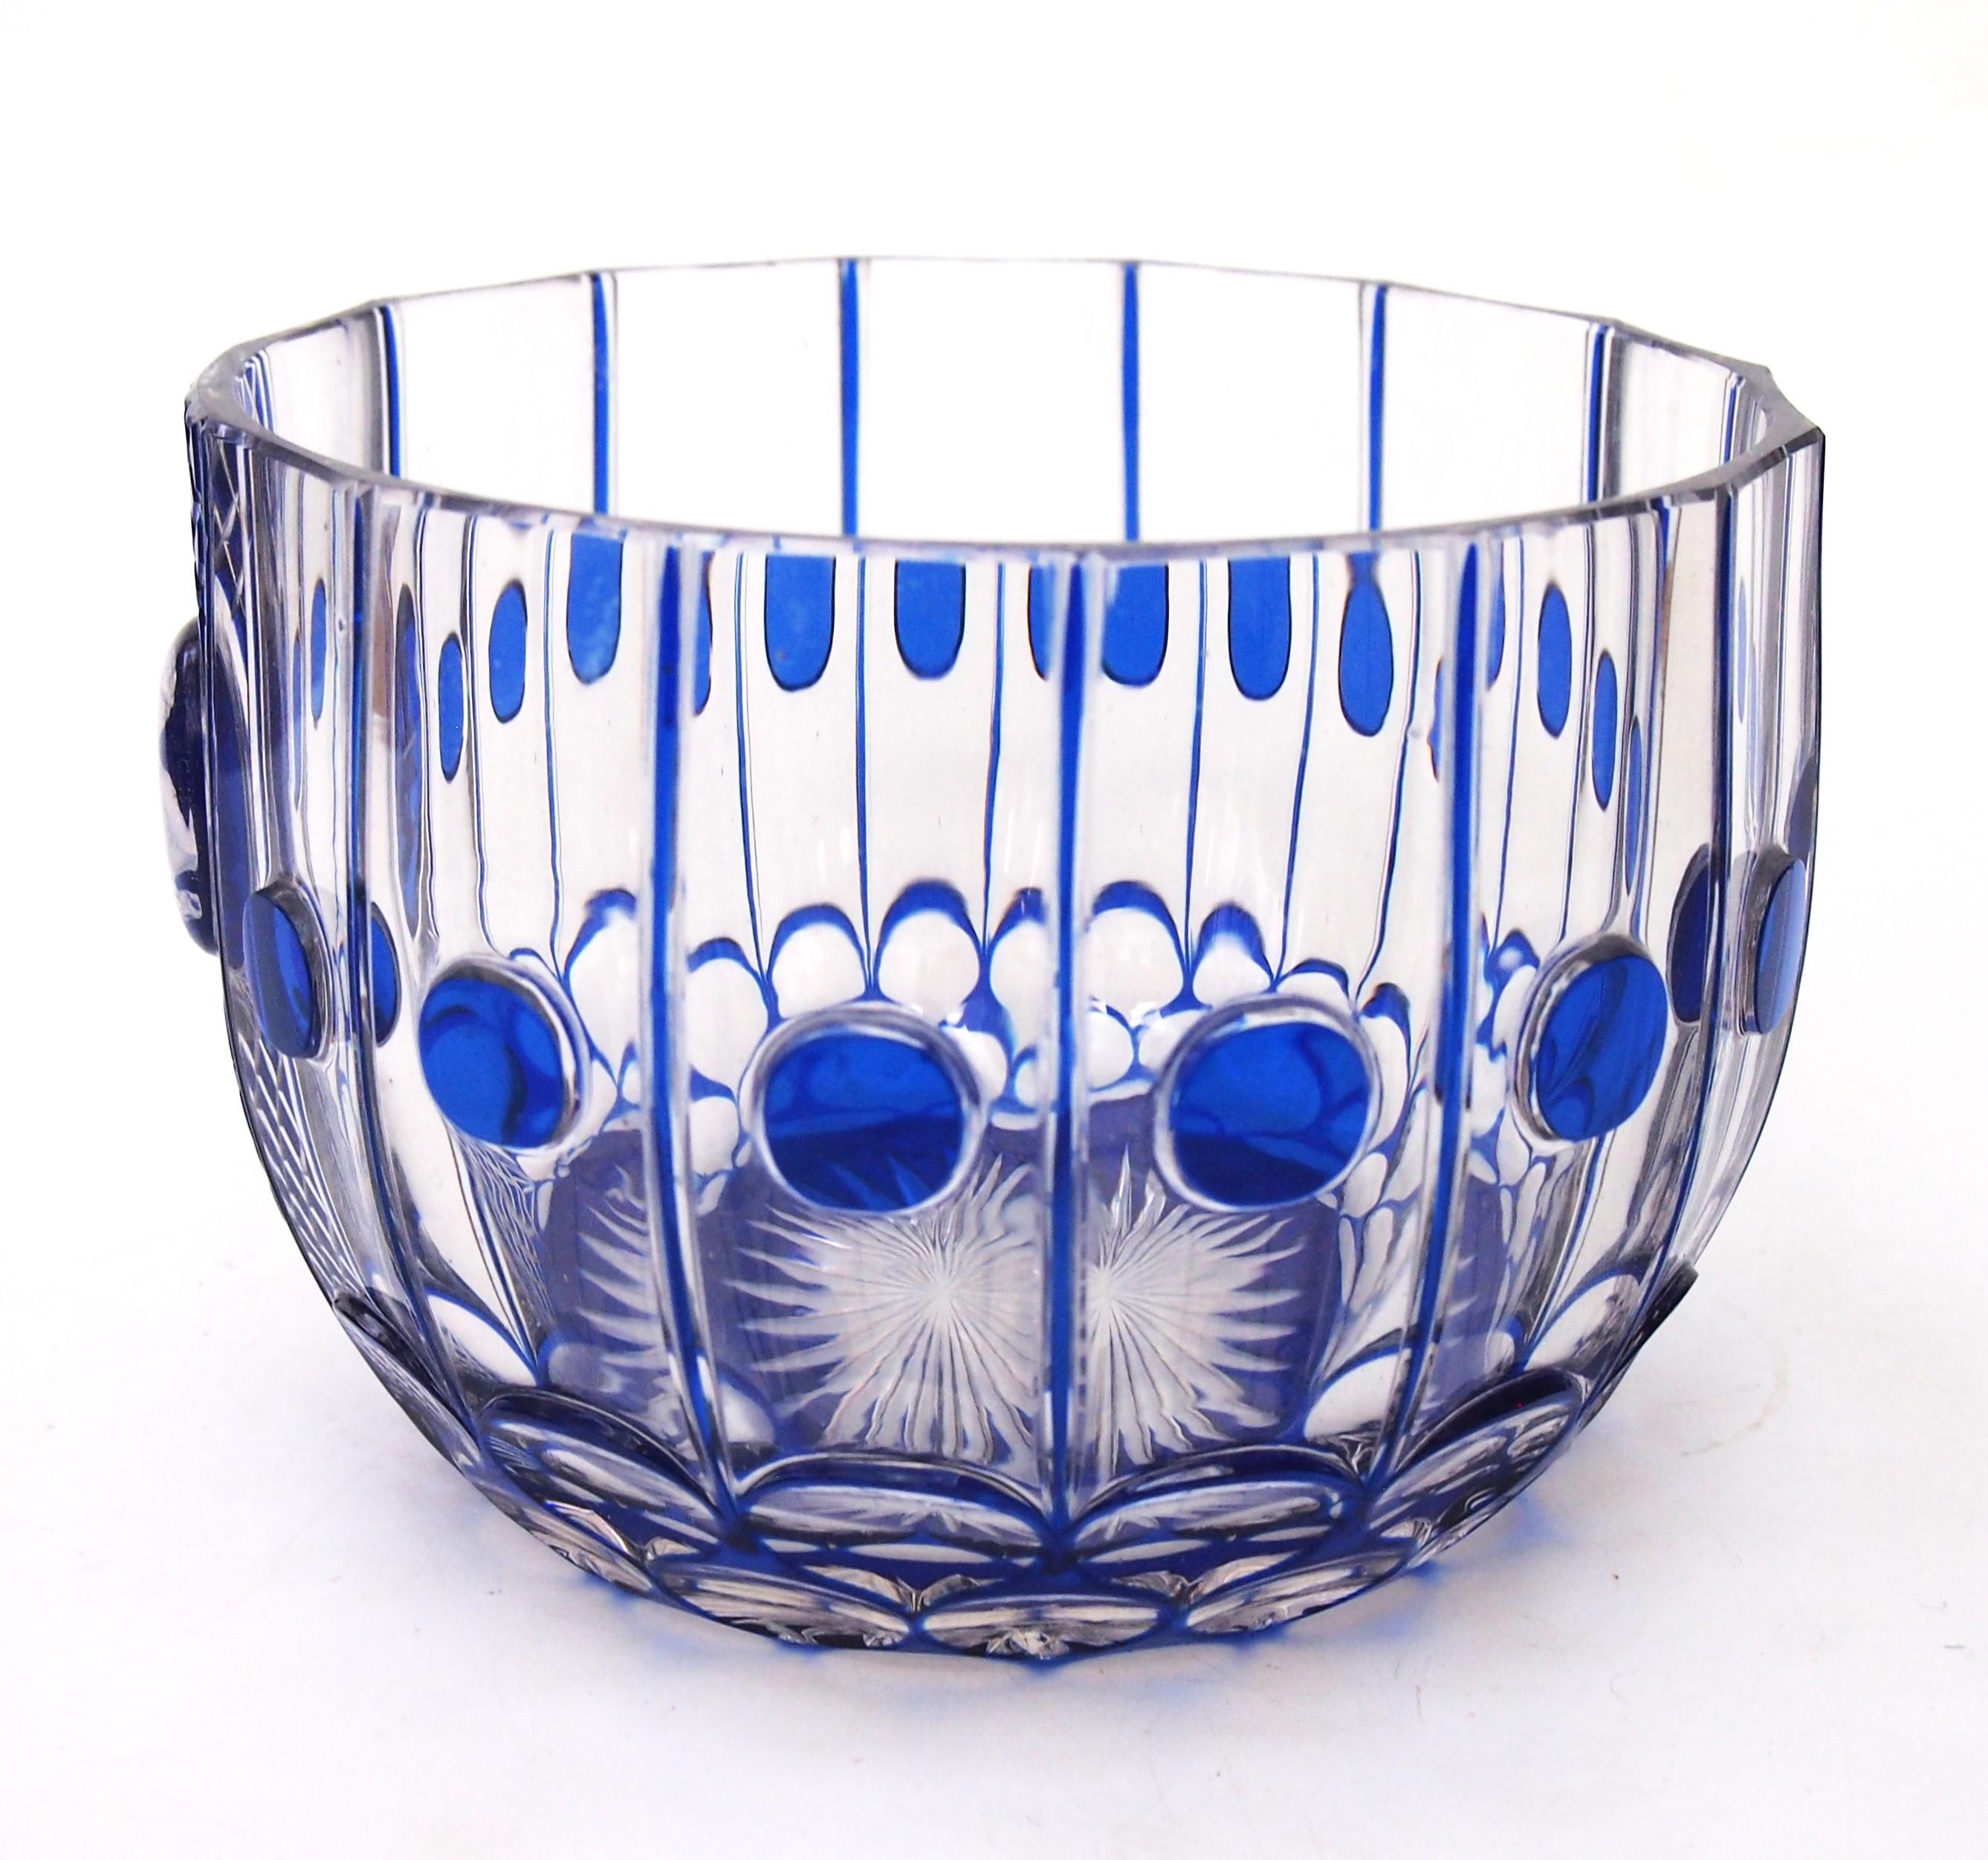 An exceptional intricately, cut to clear, bowl by Saint Louis - Rarely this bowl has a sulphide to the front depicting a courtier. The bowl is cases in blue and finely cut to clear to generate a pattern of lines and small roundels. The lower parts